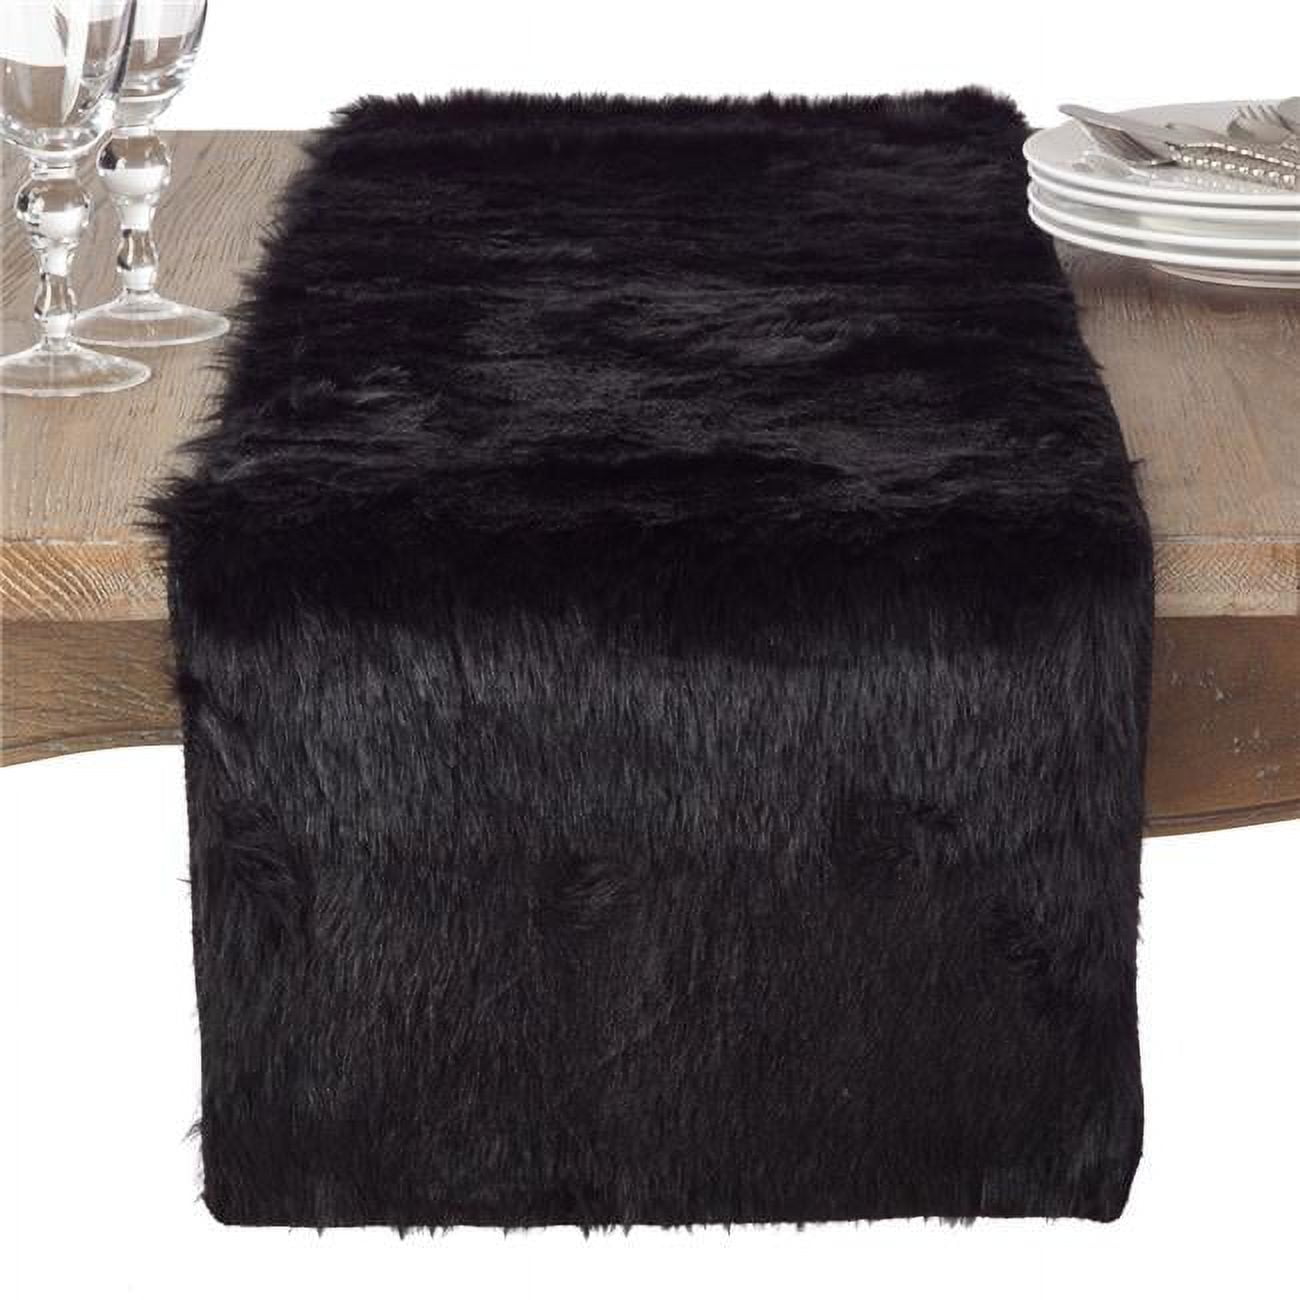  Faux Fur Table Runner,Furry Dresser Covers,Luxury Table Runner  Shaggy Dresser Cover top,Christmas Table Runner Decorative Dresser Table  Protector Not-Slip Desk Pad Rug for Party Wedding : Home & Kitchen